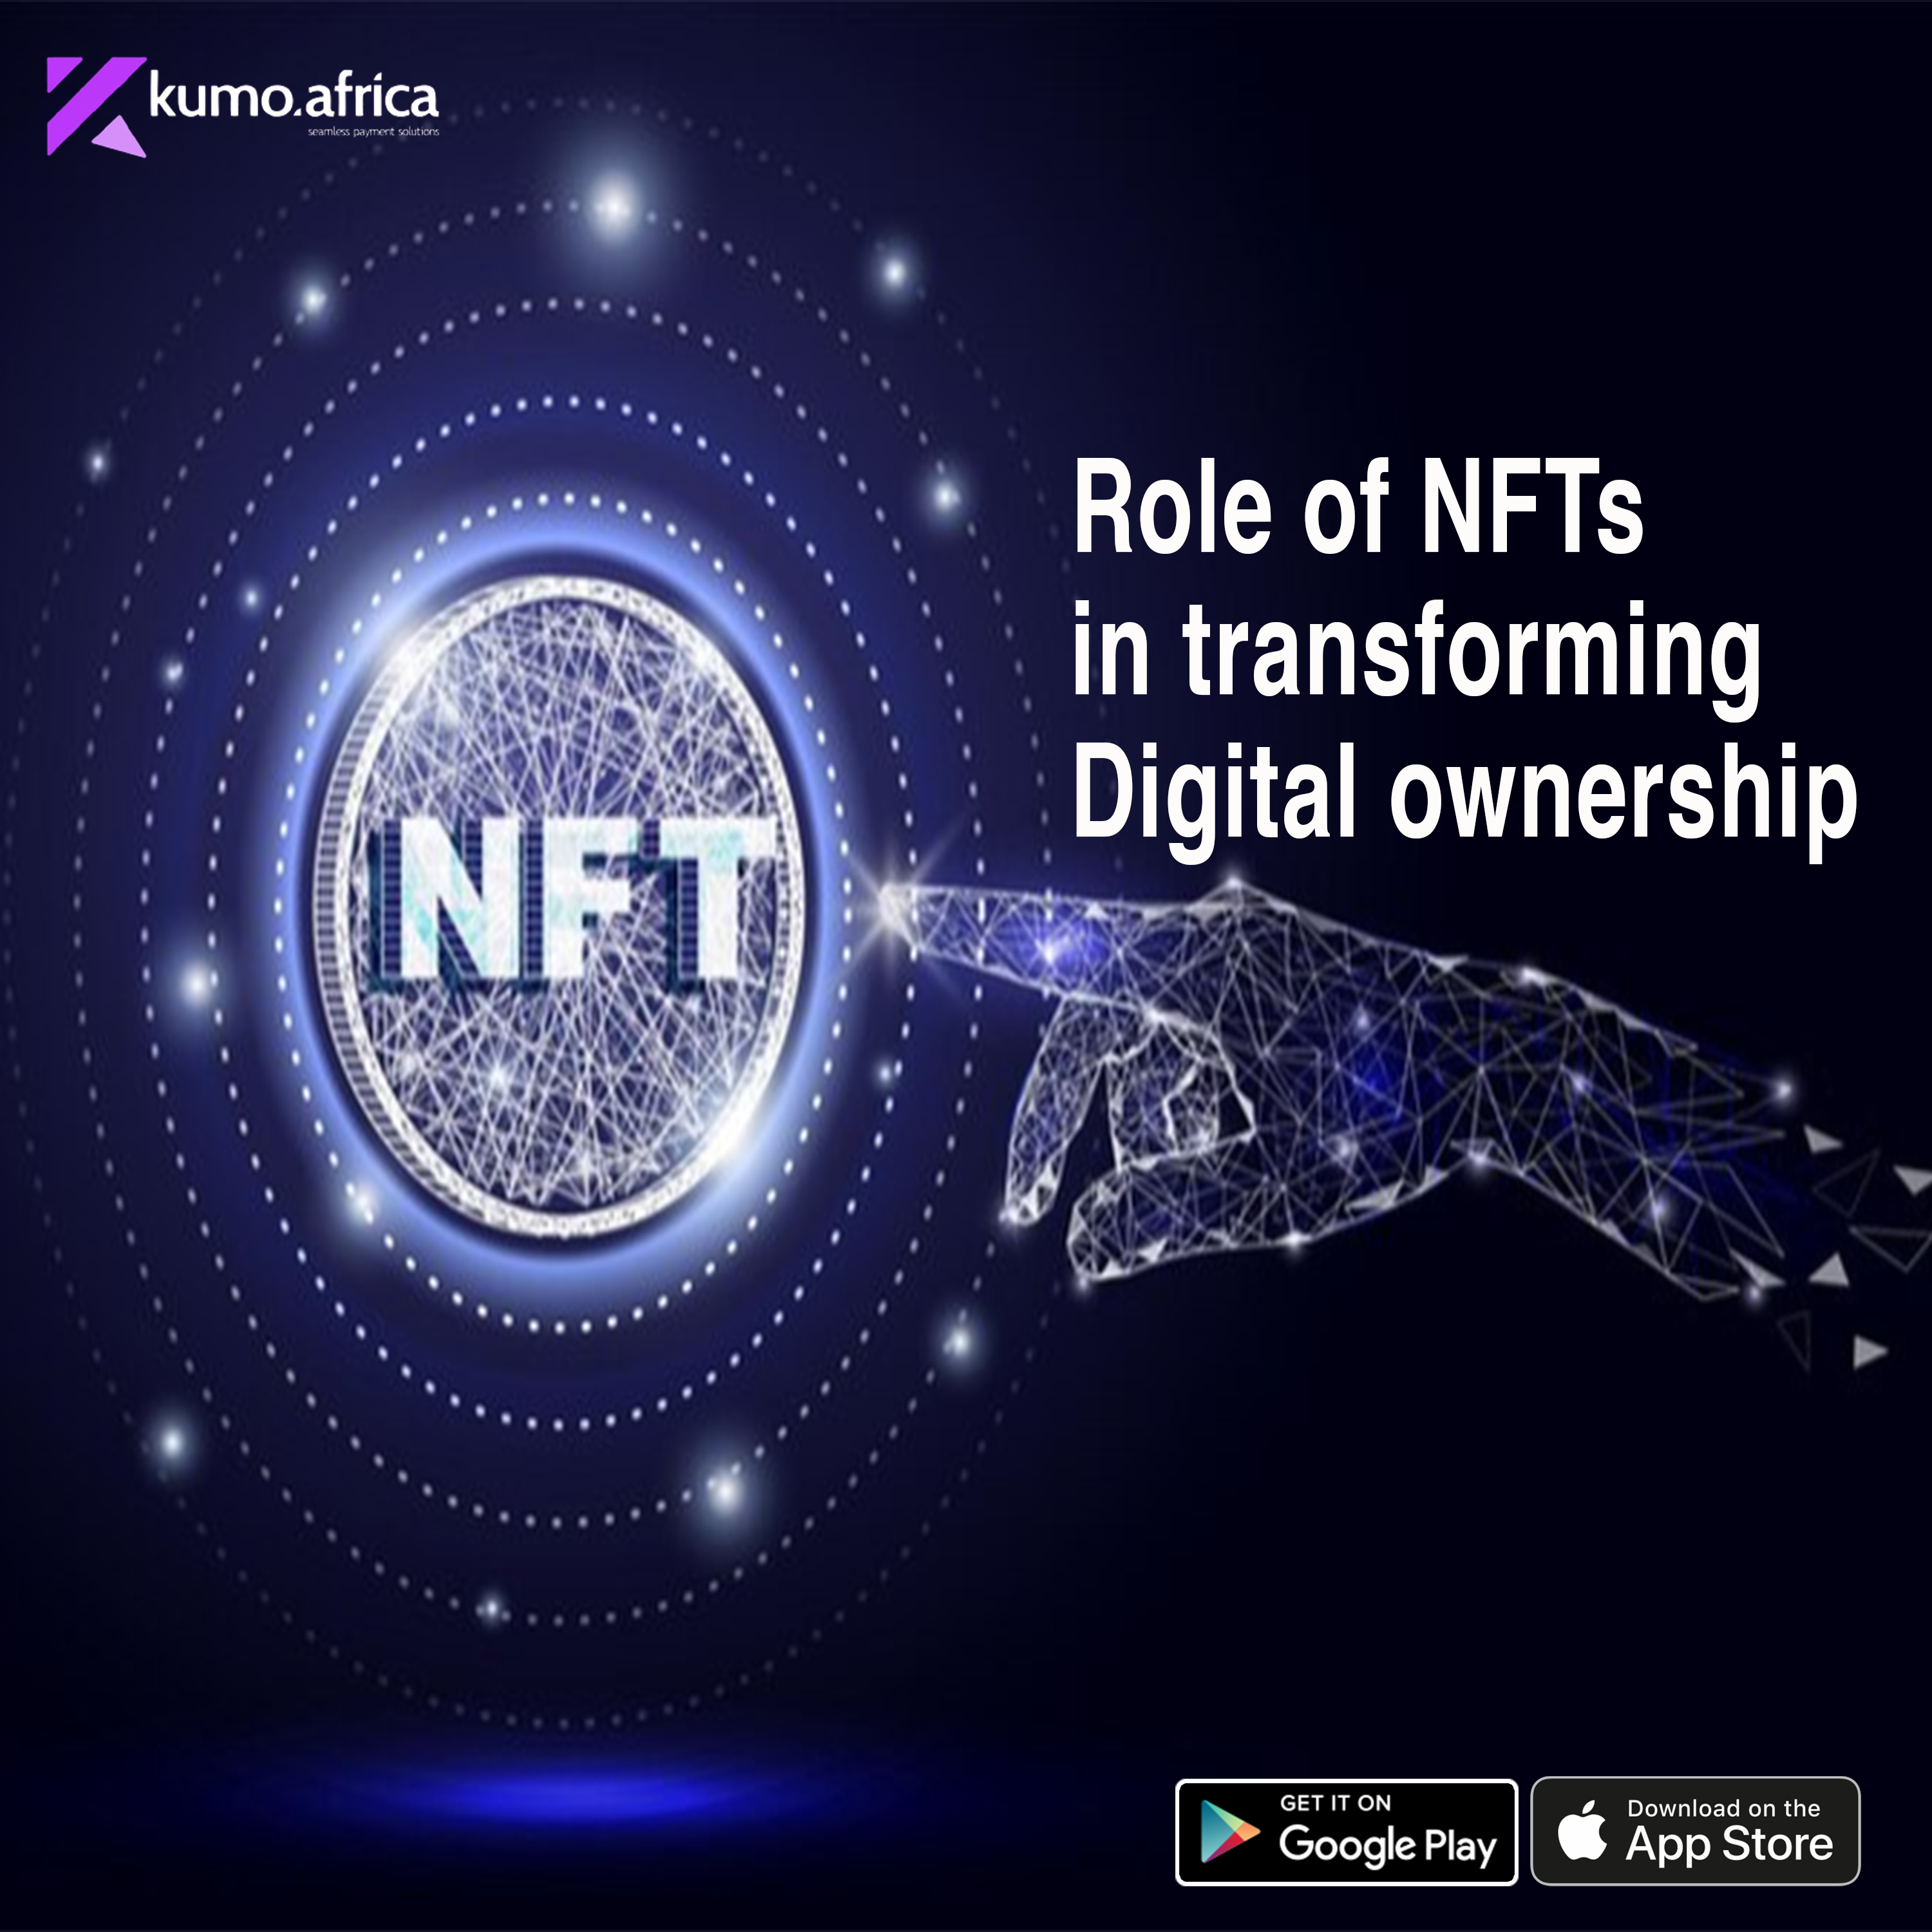 NFTs and digital ownership